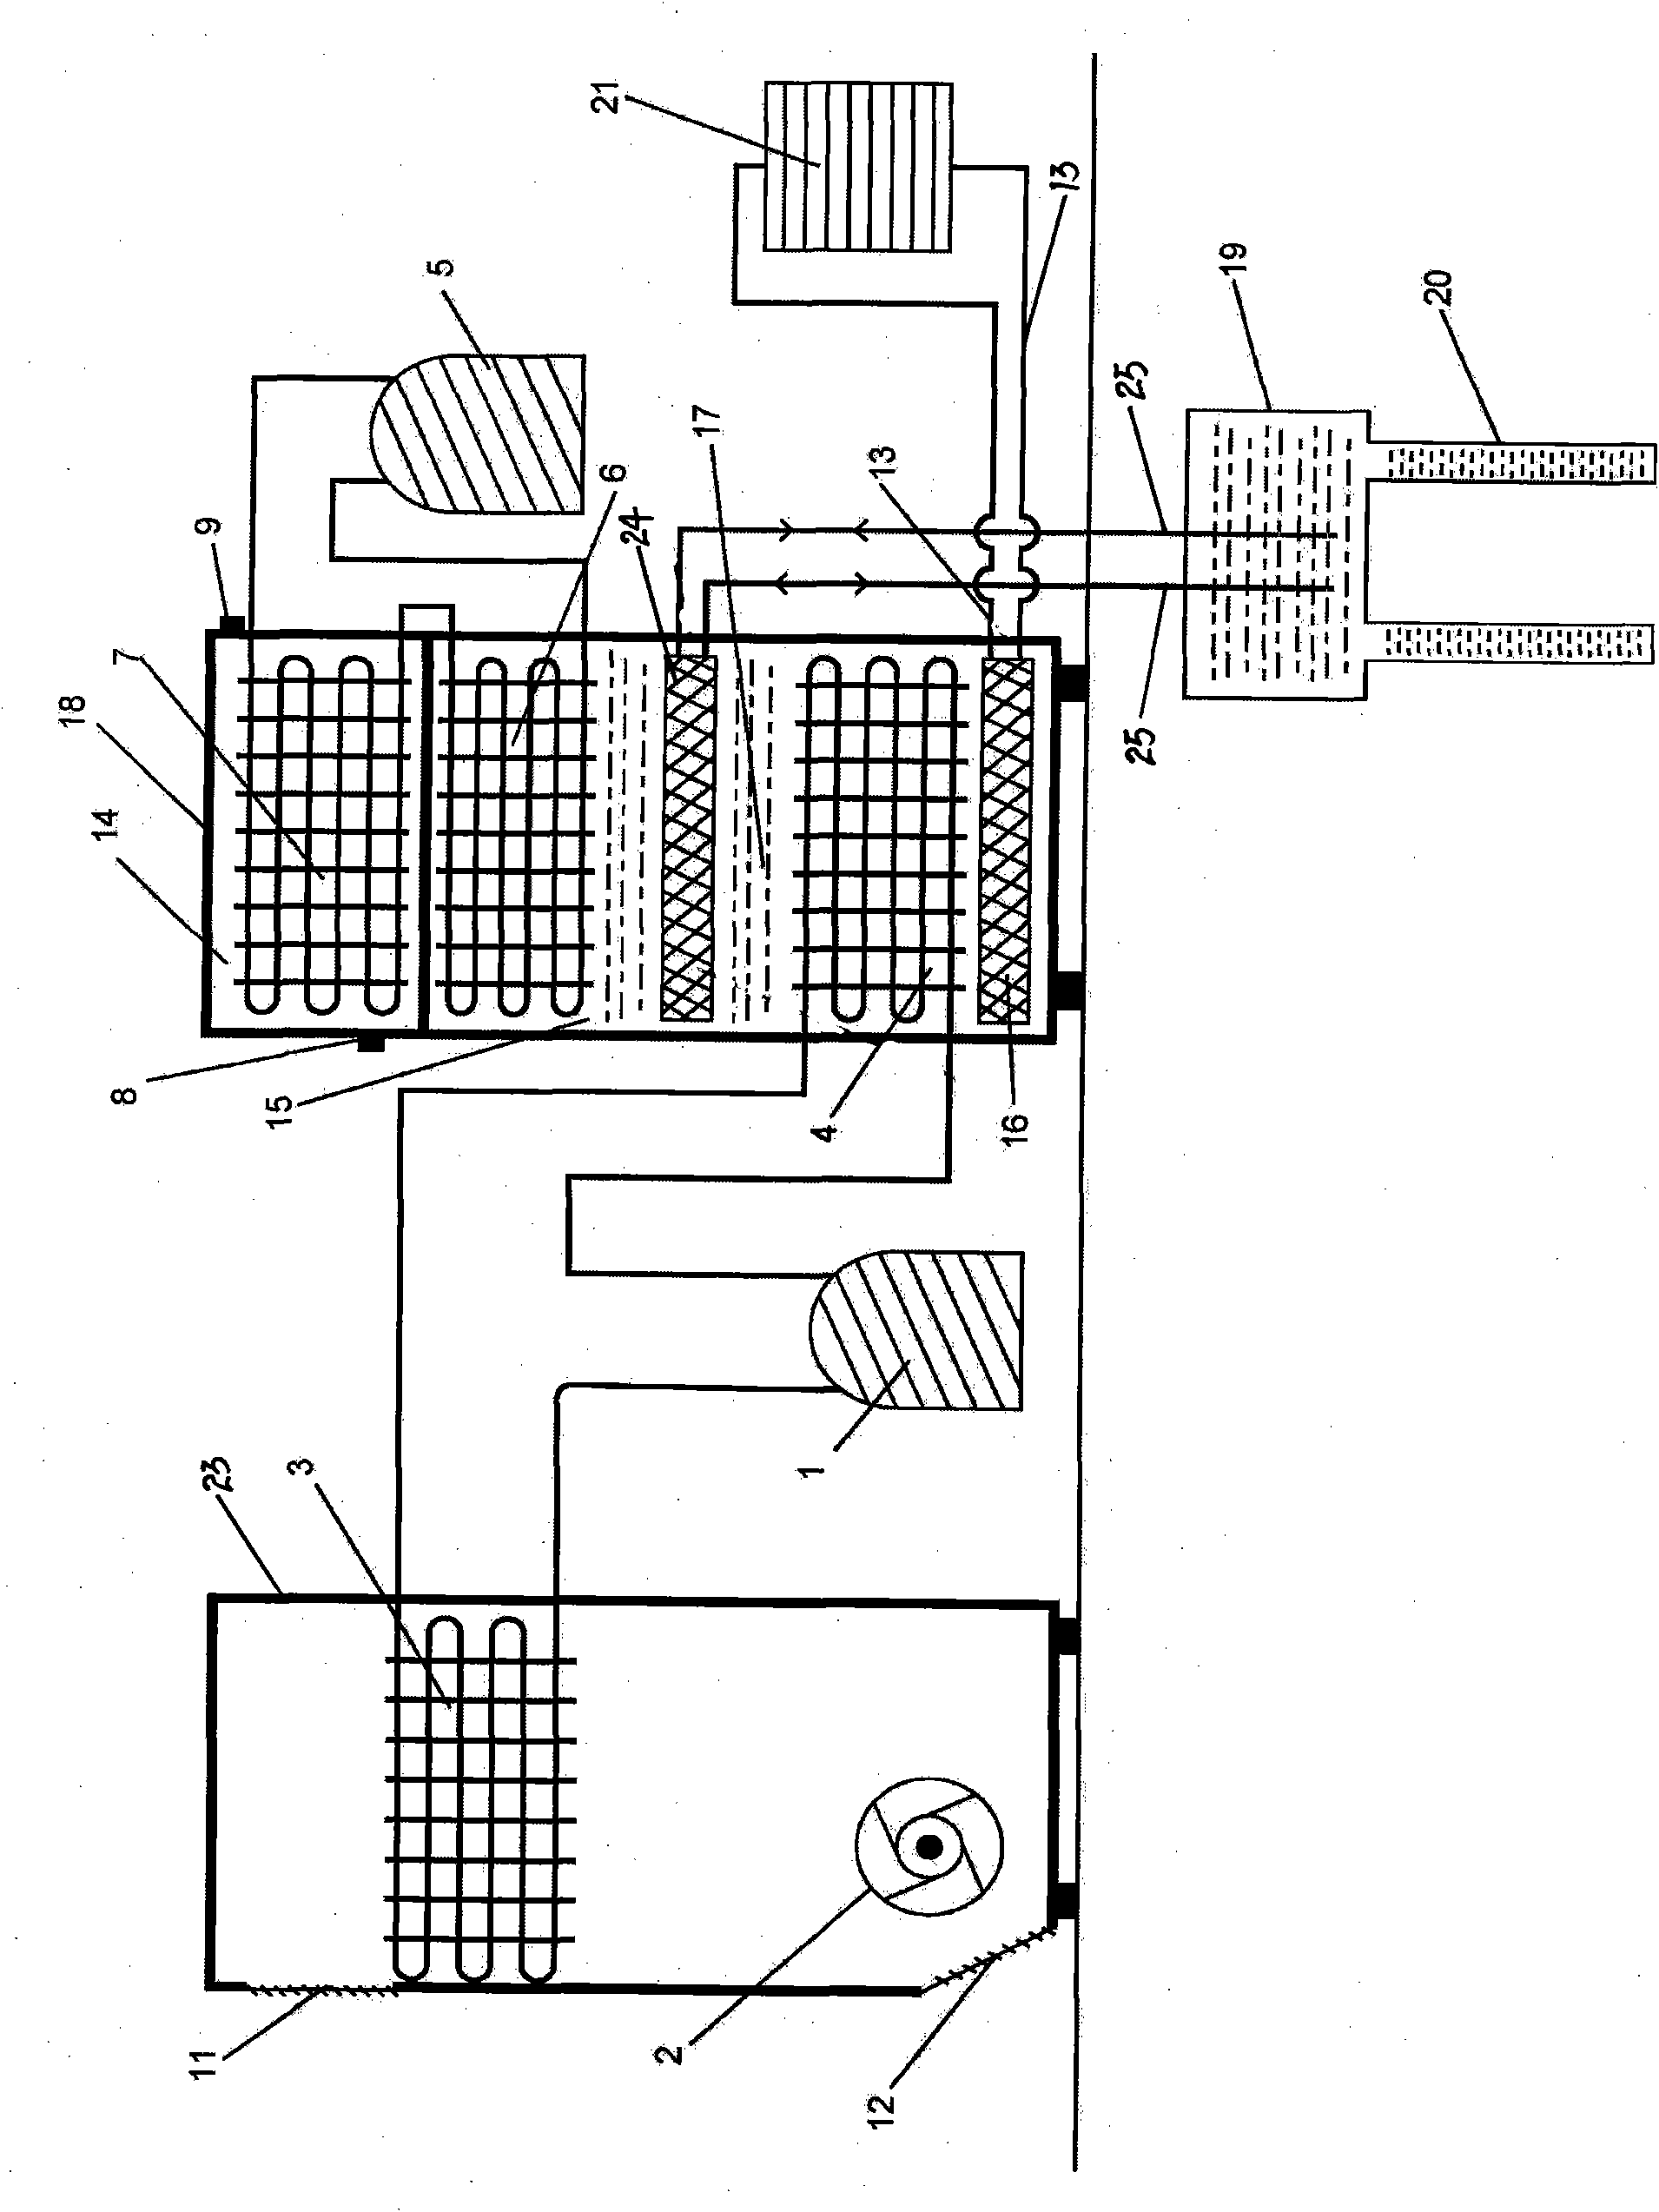 Water-cooled air conditioning and water heating system